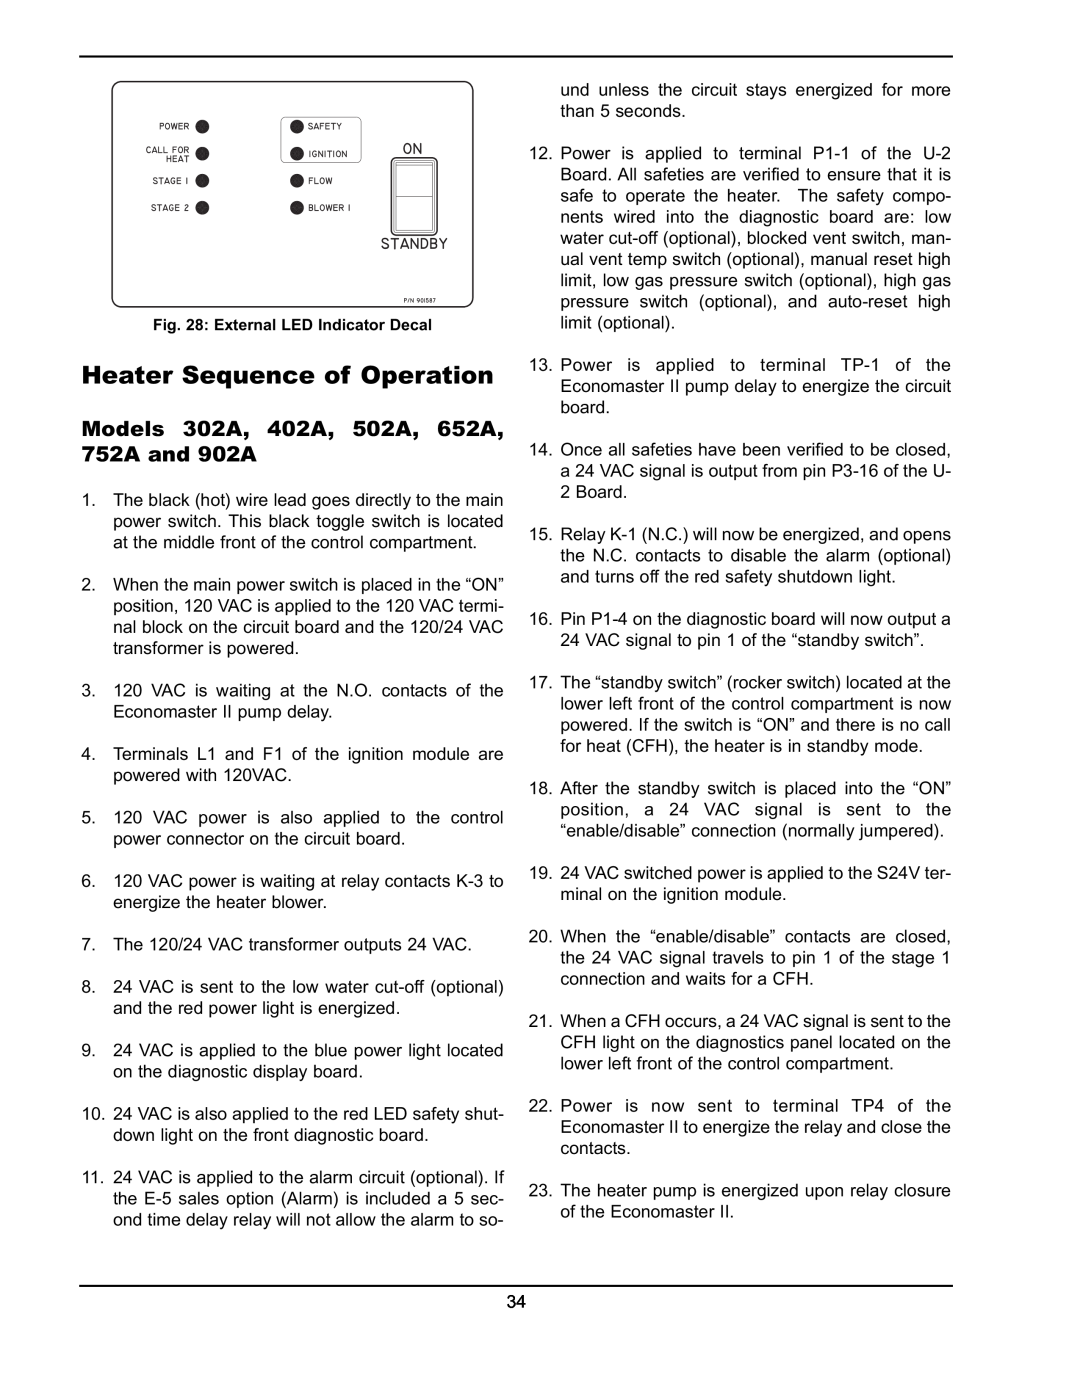 Raypak 302A-902A manual Heater Sequence of Operation, Models 302A, 402A, 502A, 652A, 752A and 902A 